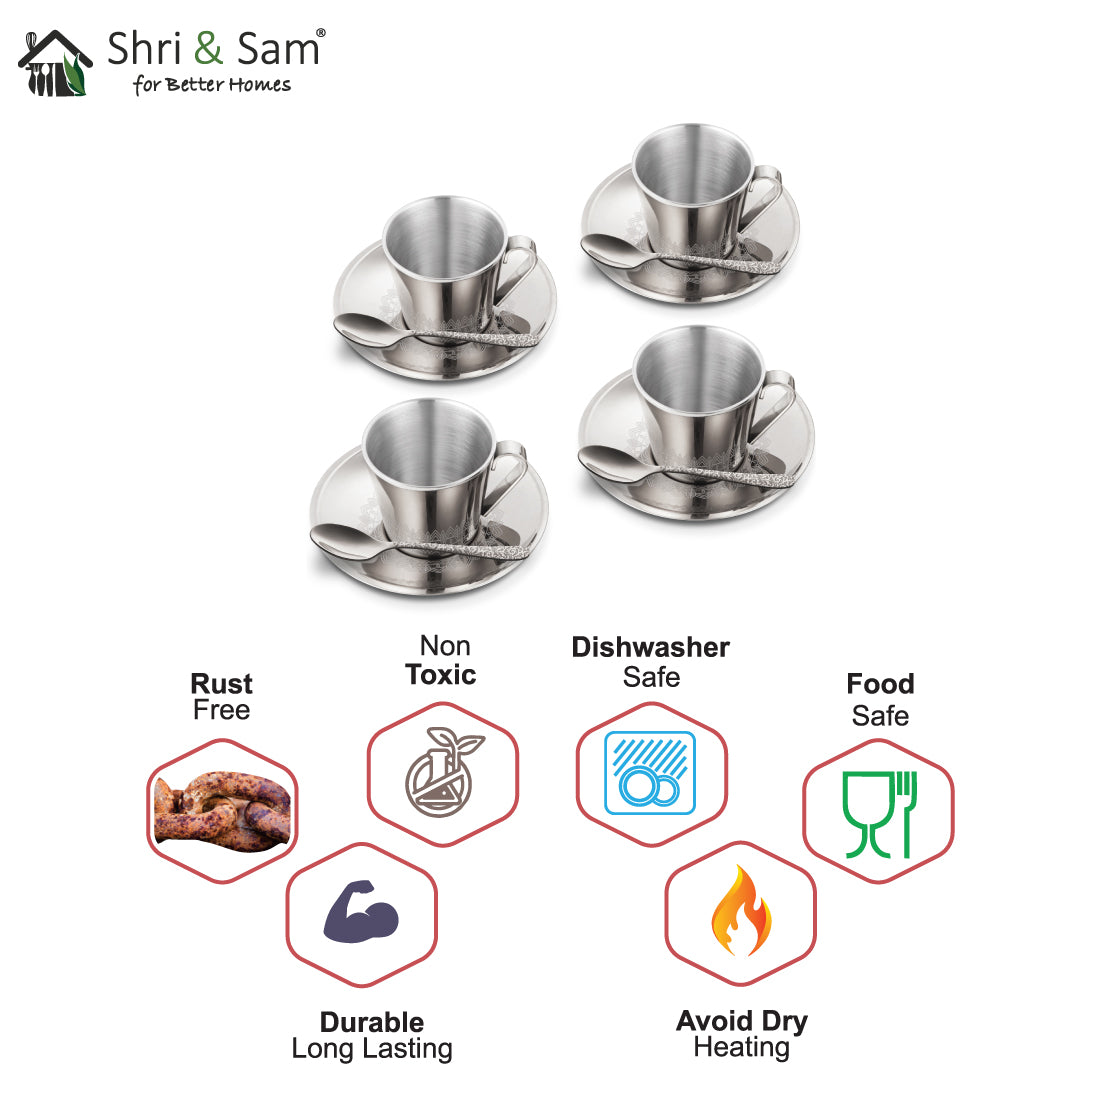 Stainless Steel 4 PCS Double Wall Cup and Saucer with Laser Rise